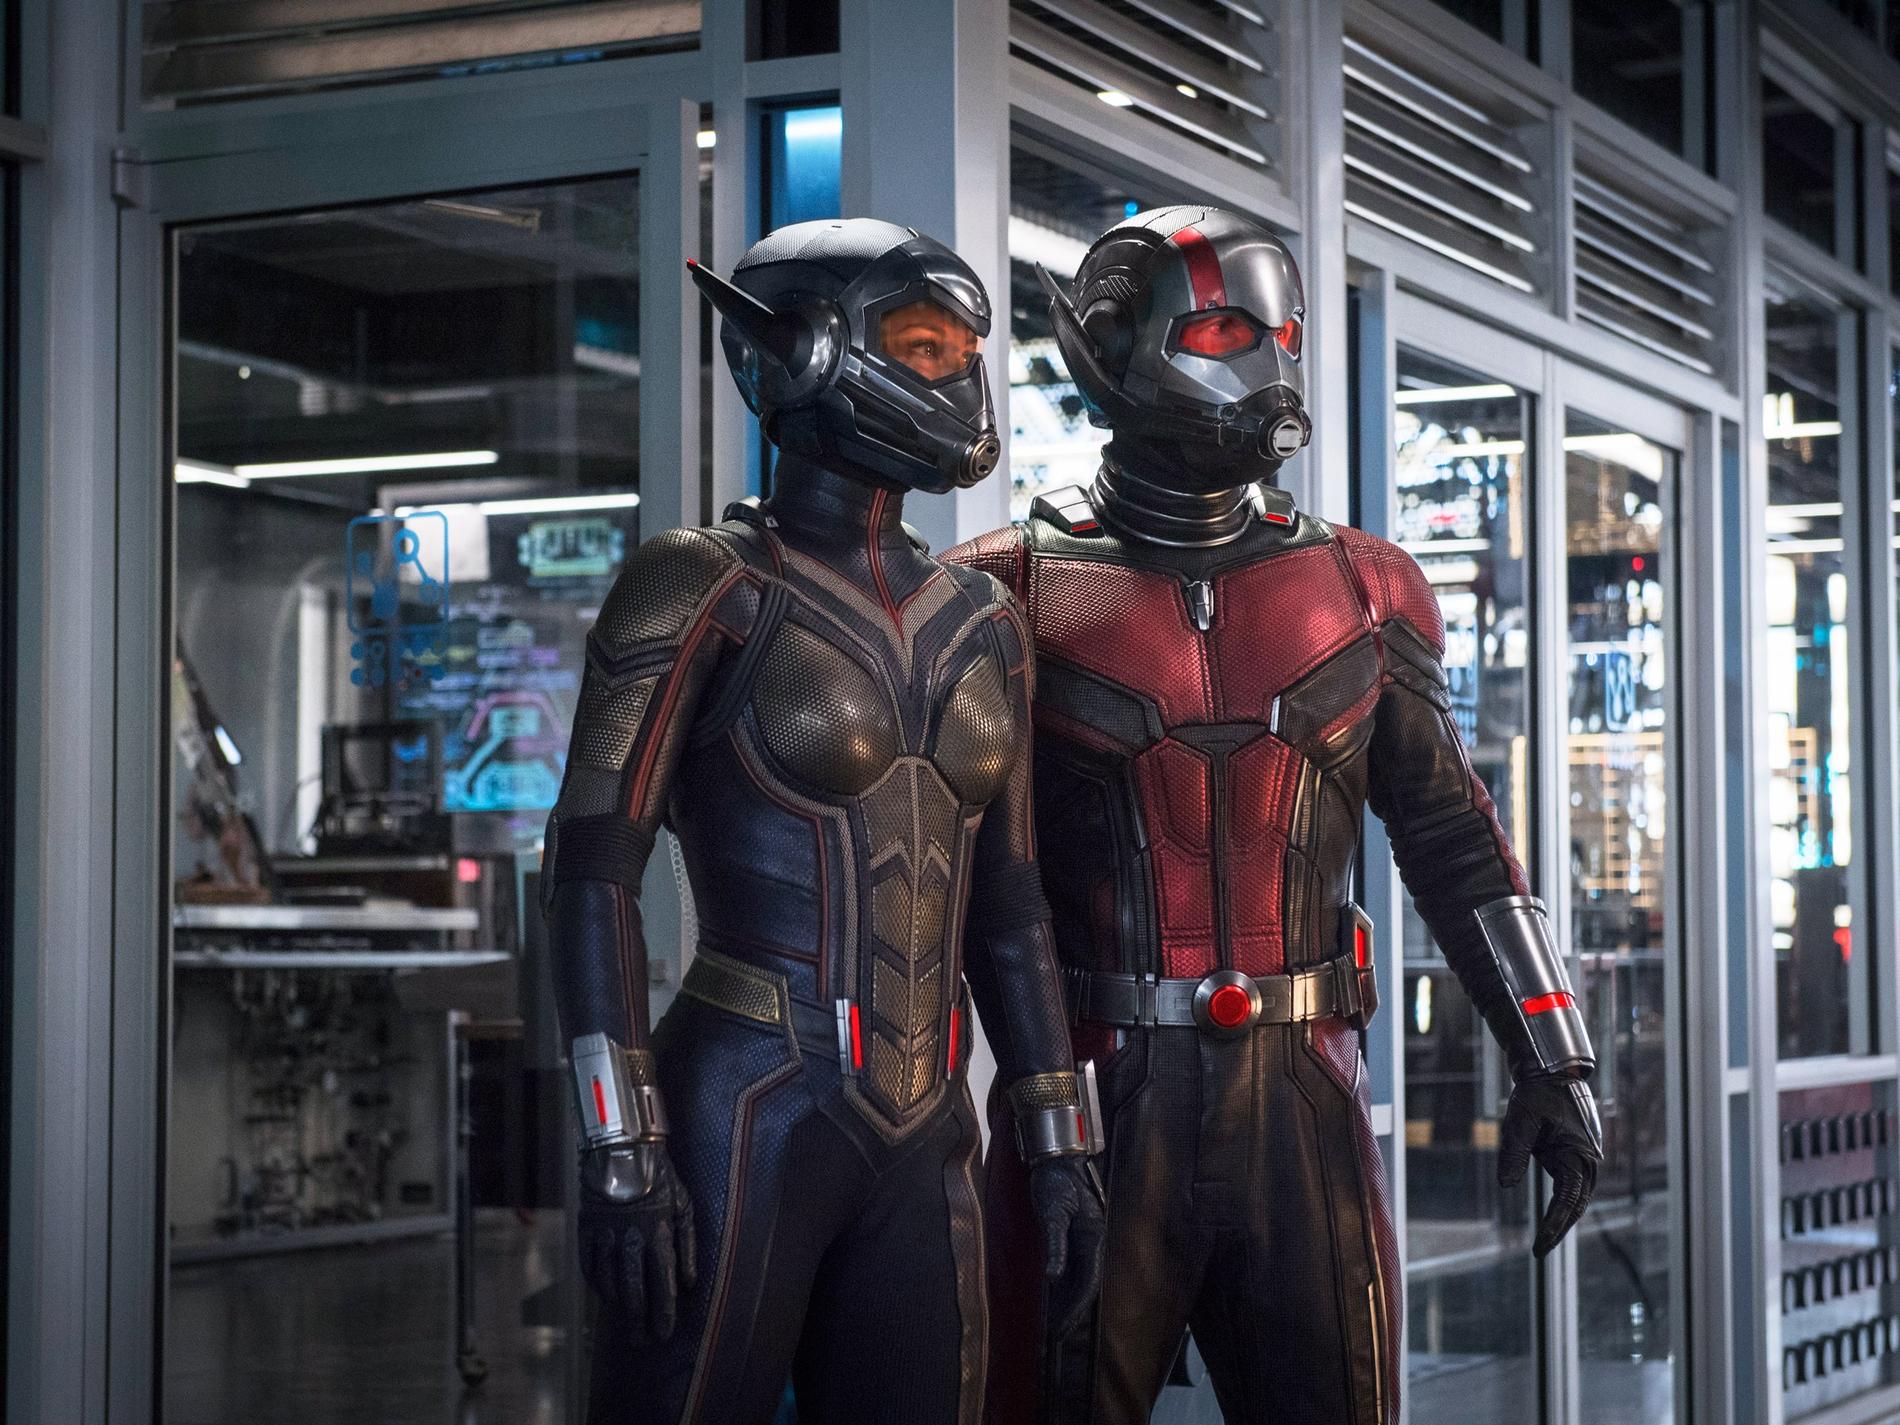 ”Ant-man and the Wasp”.